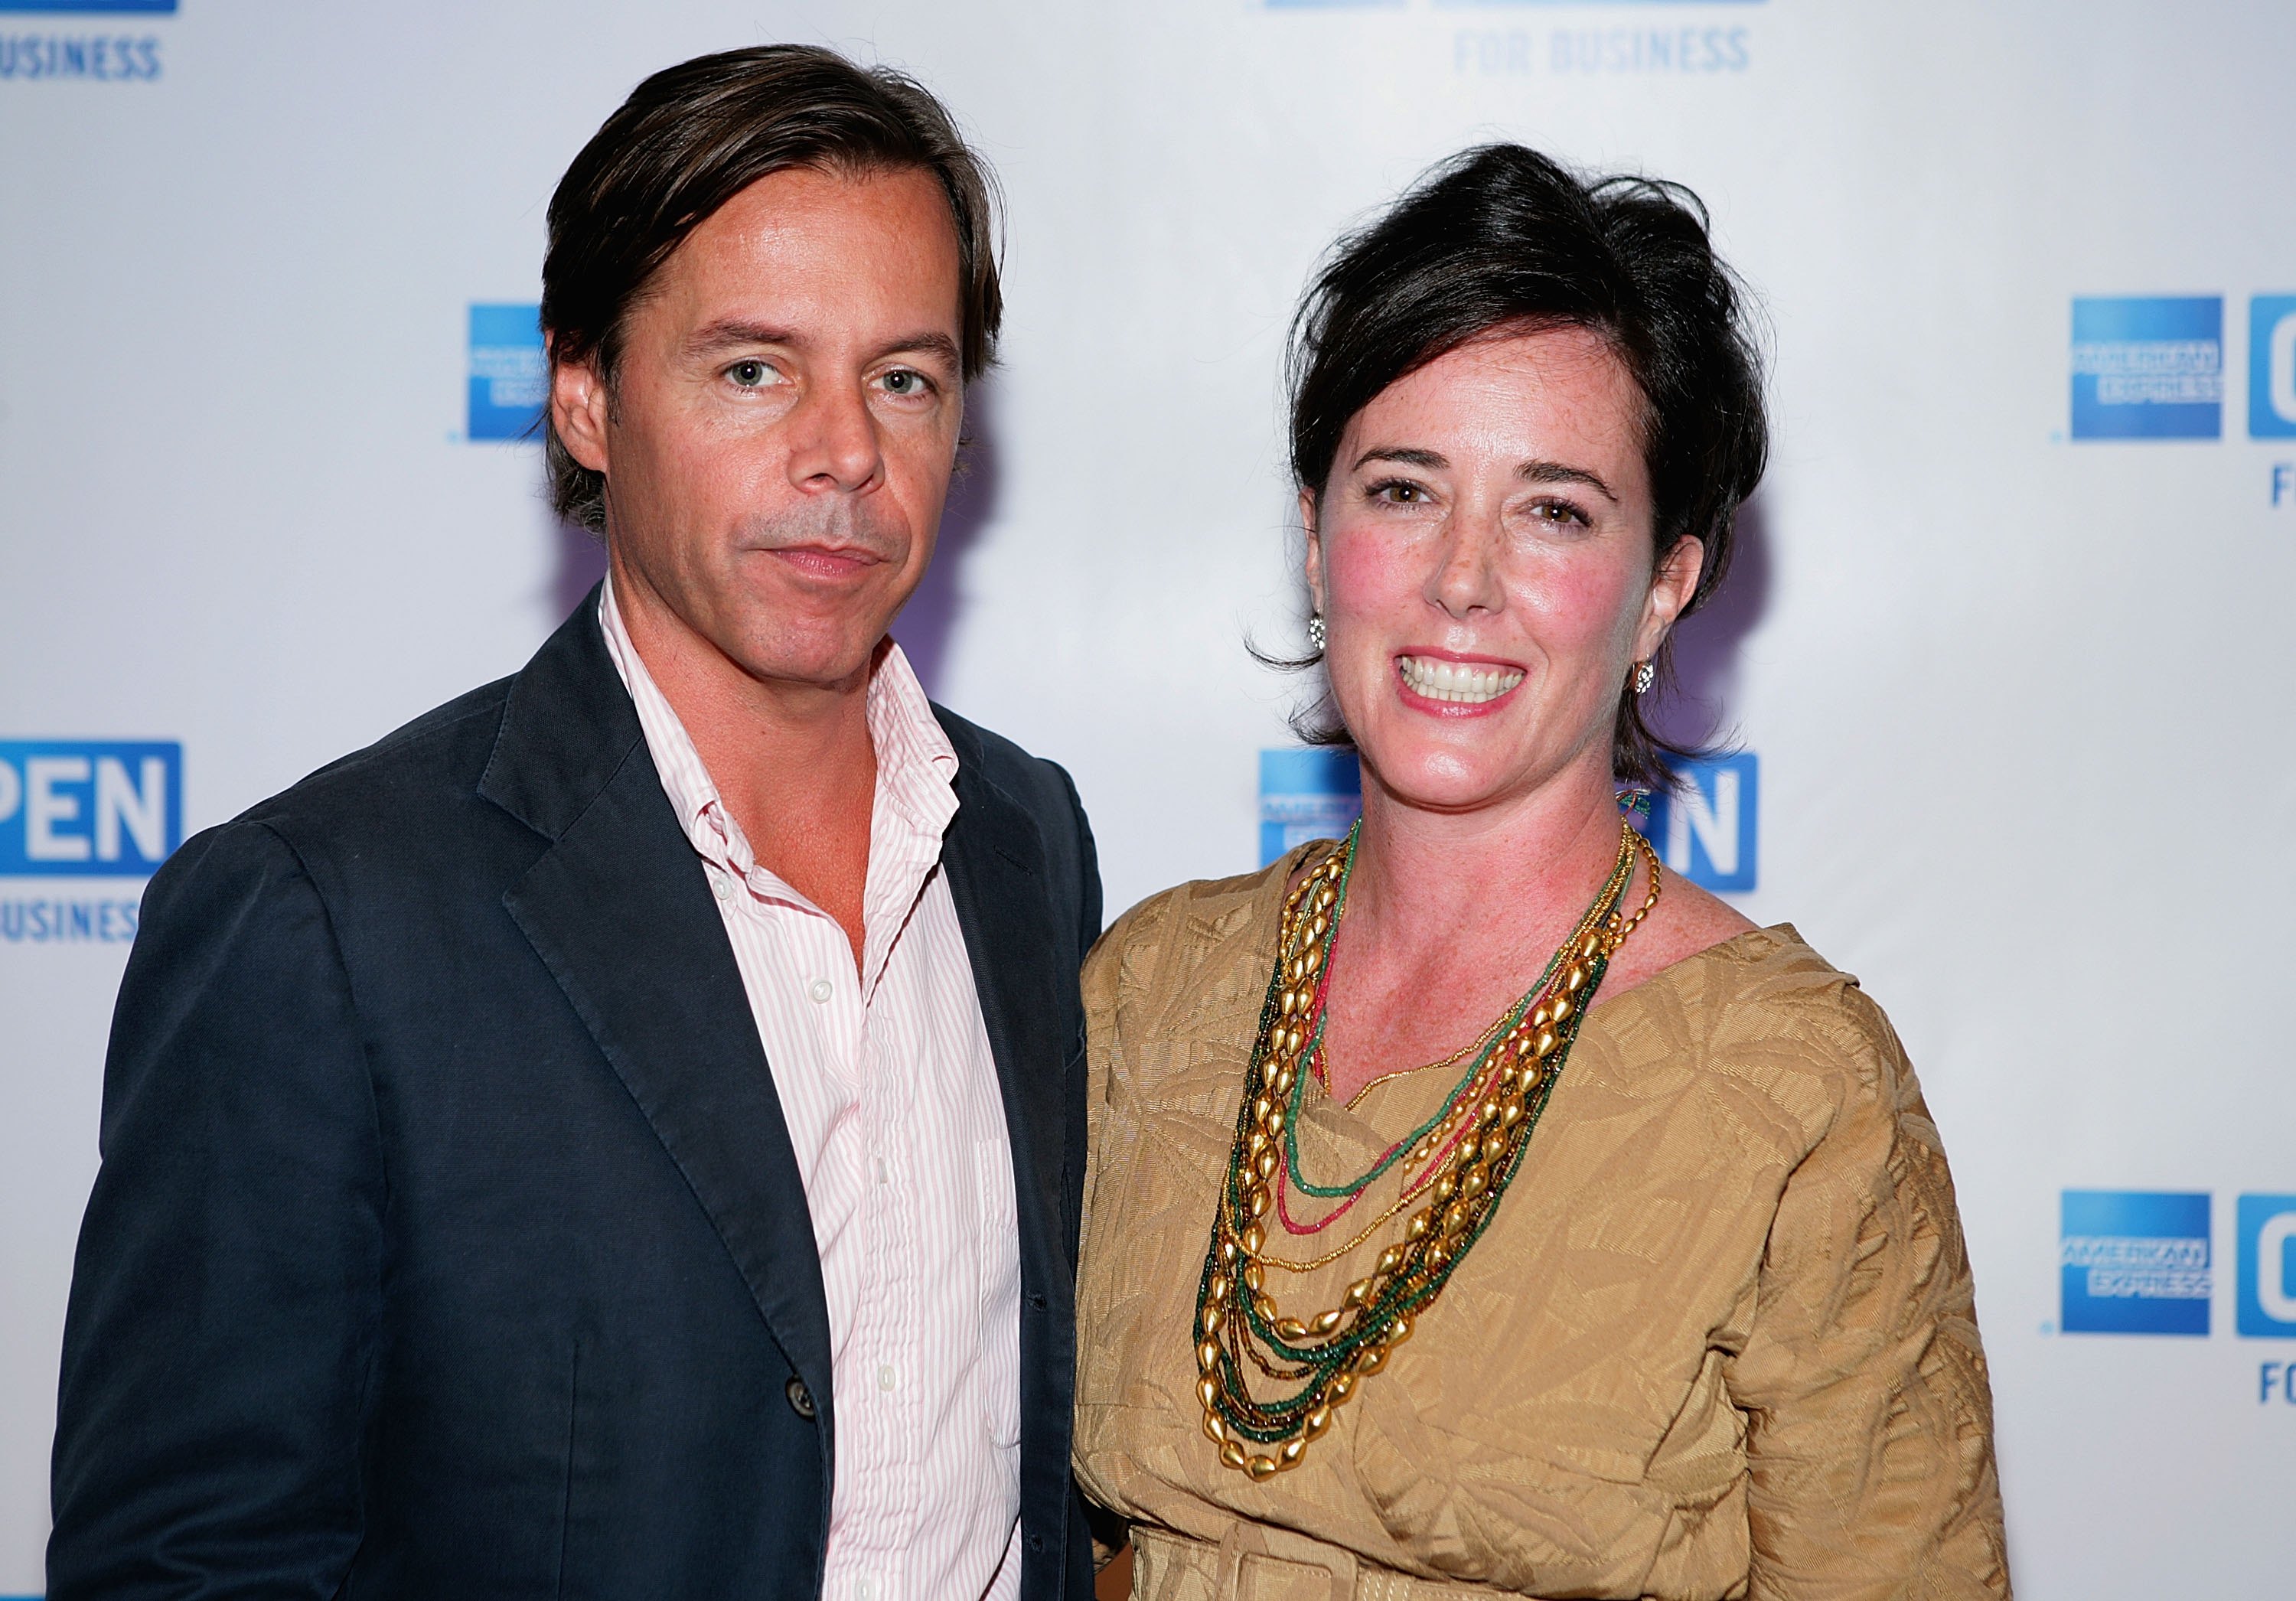 Kate Spade Found Dead of Apparent Suicide in Park Avenue Apartment – NBC  New York